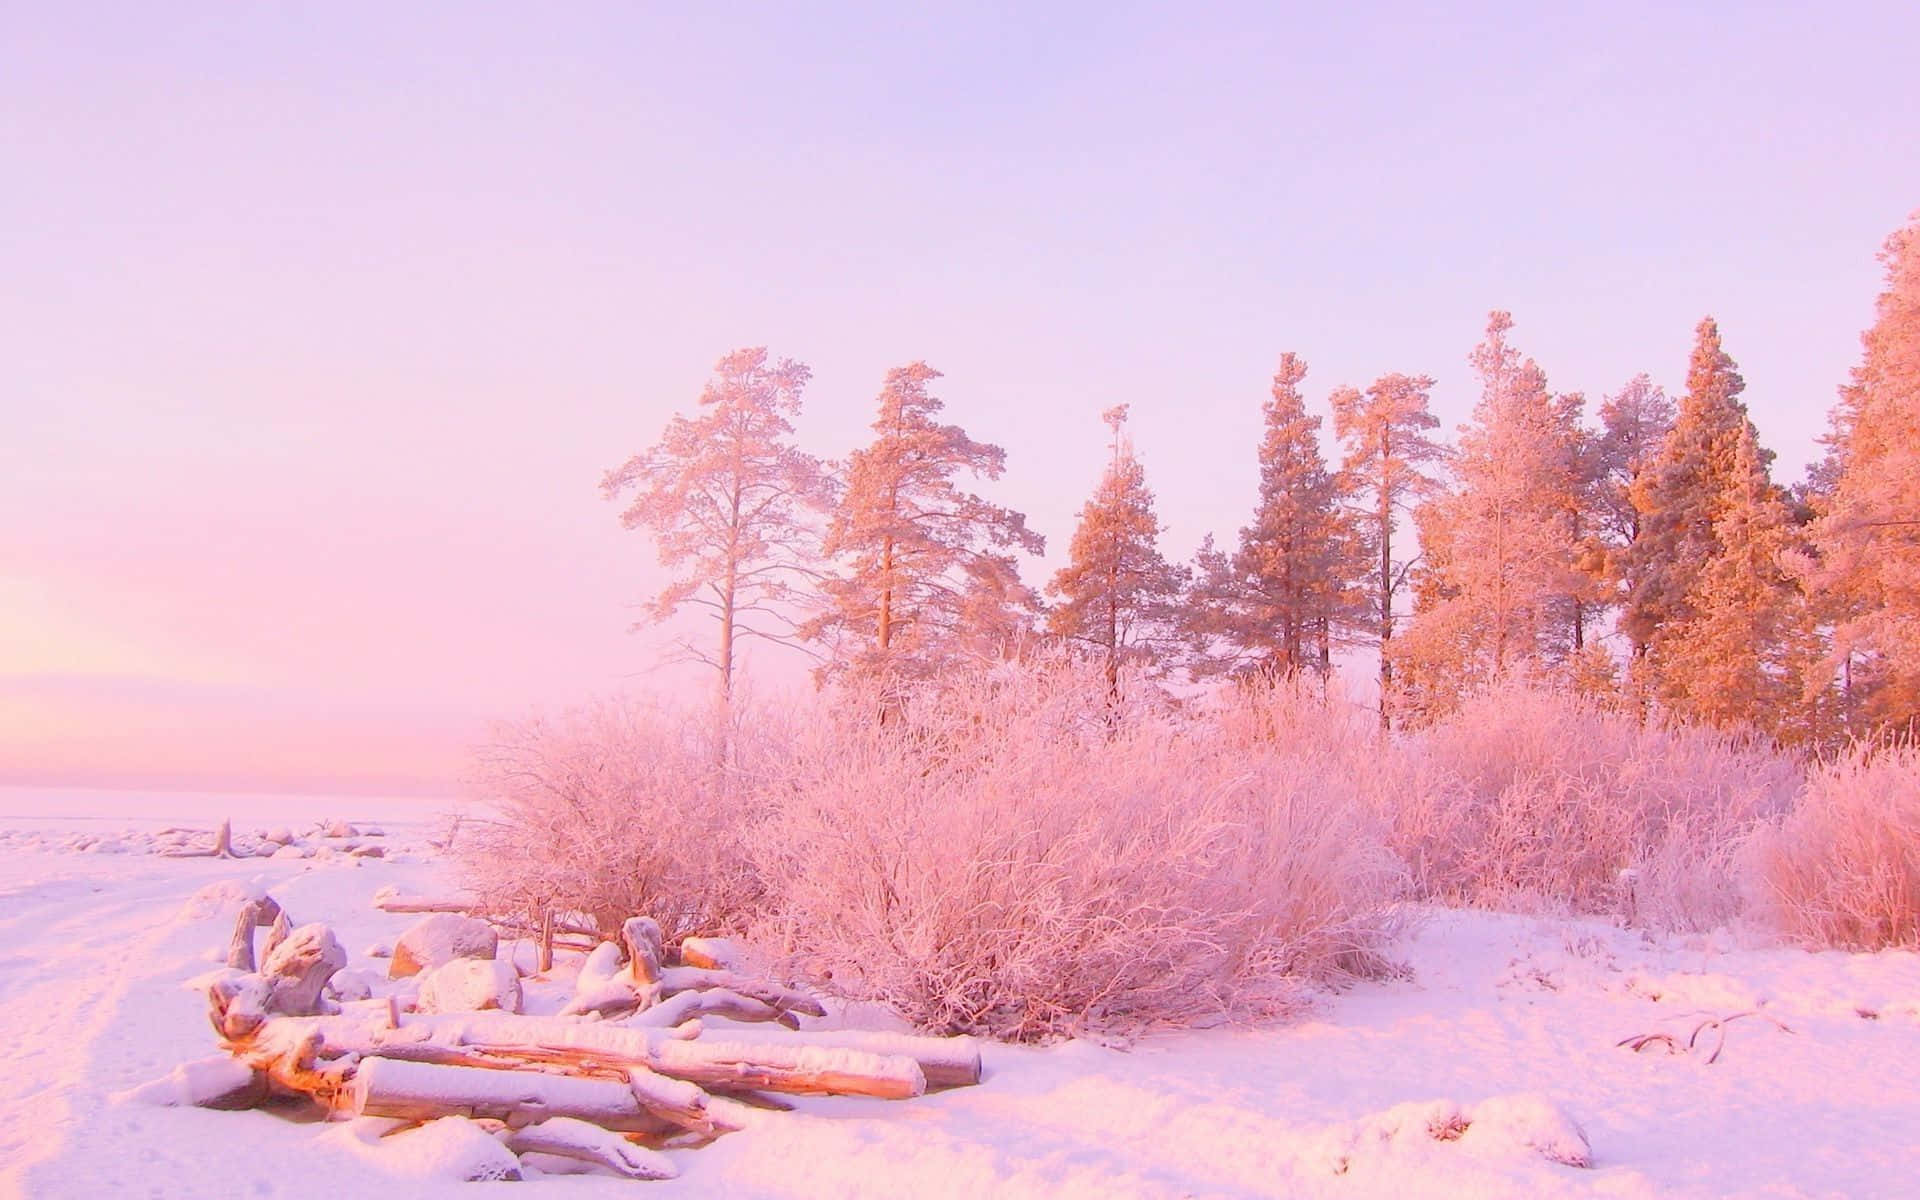 Enjoy the warmth and beauty of pink aesthetic. Wallpaper